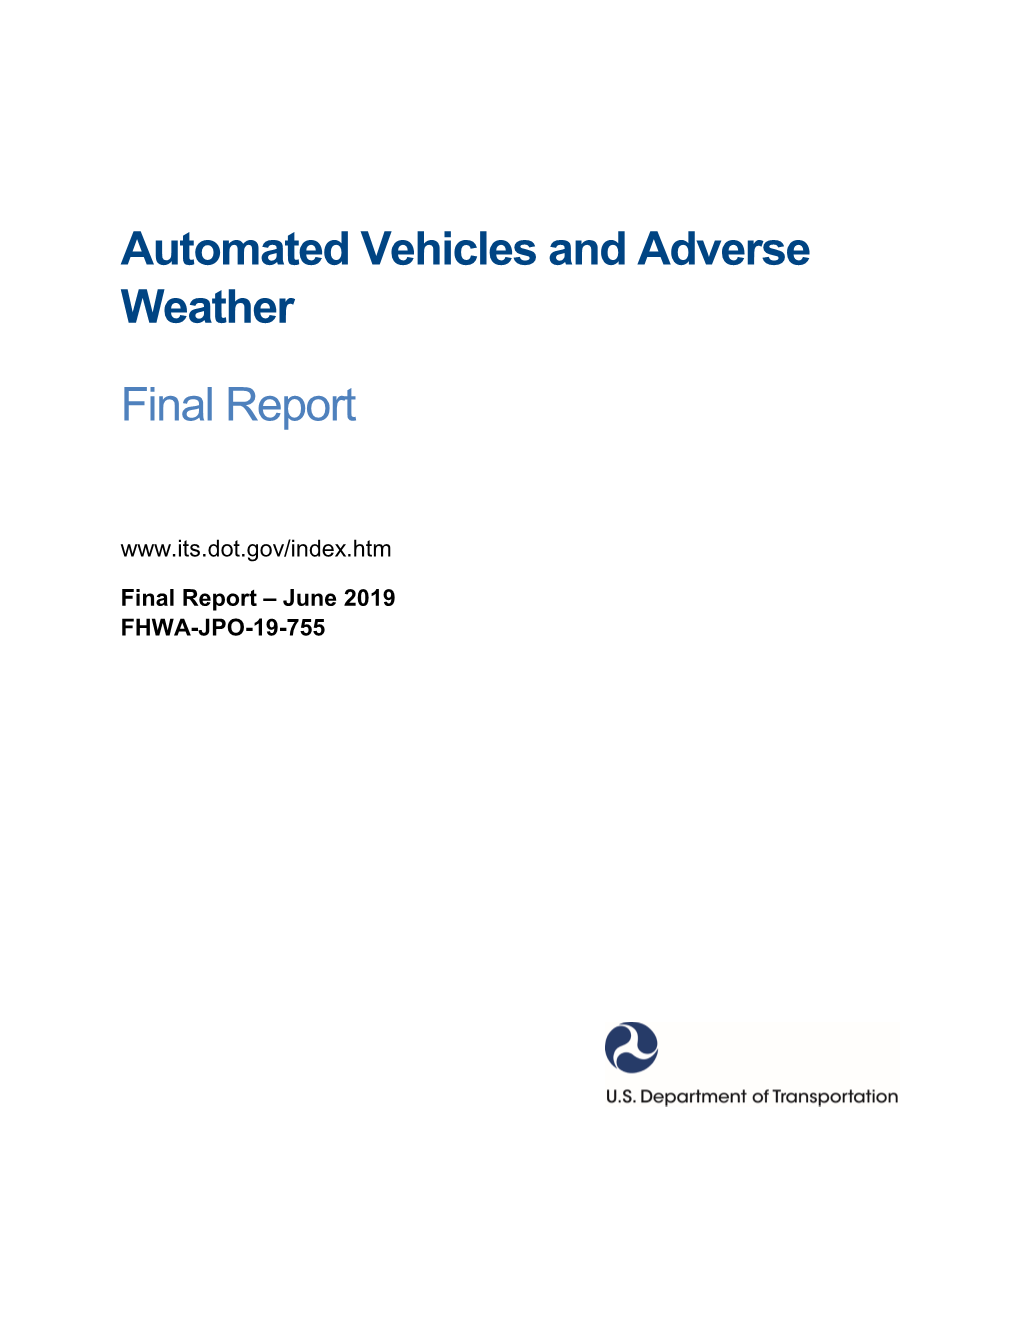 Automated Vehicles and Adverse Weather